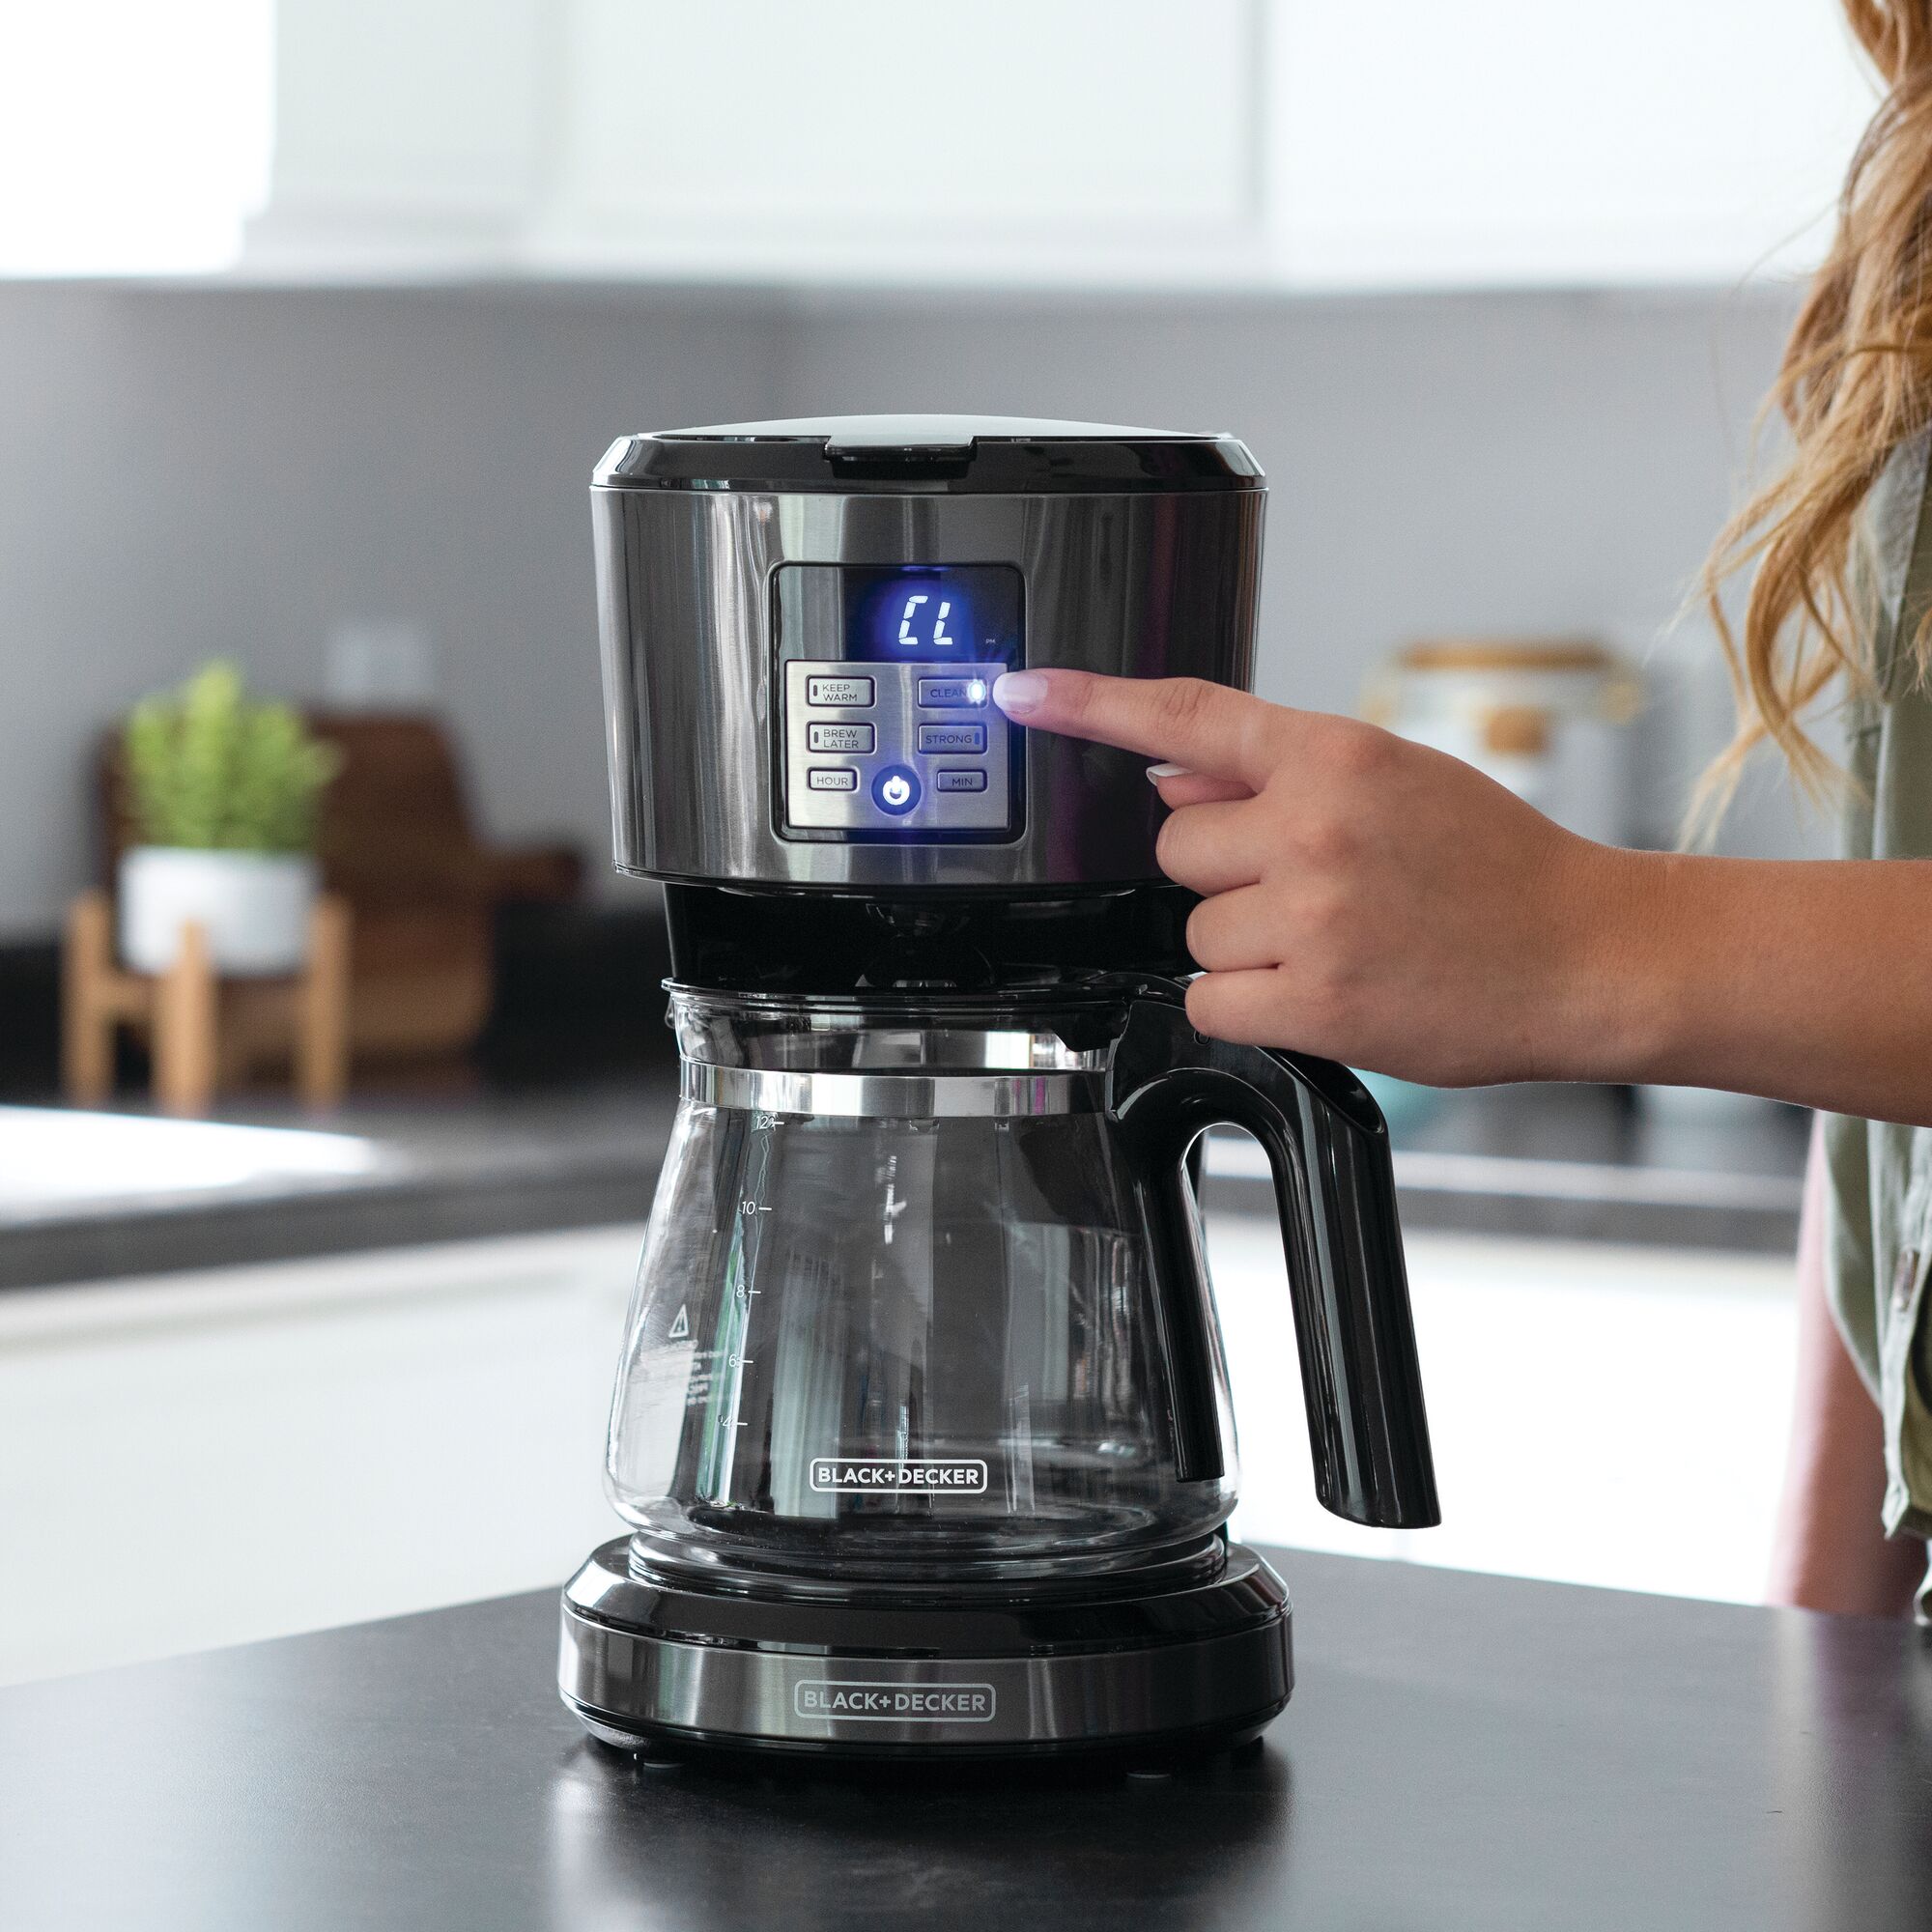 Person pushing the controls on the BLACK+DECKER coffee maker